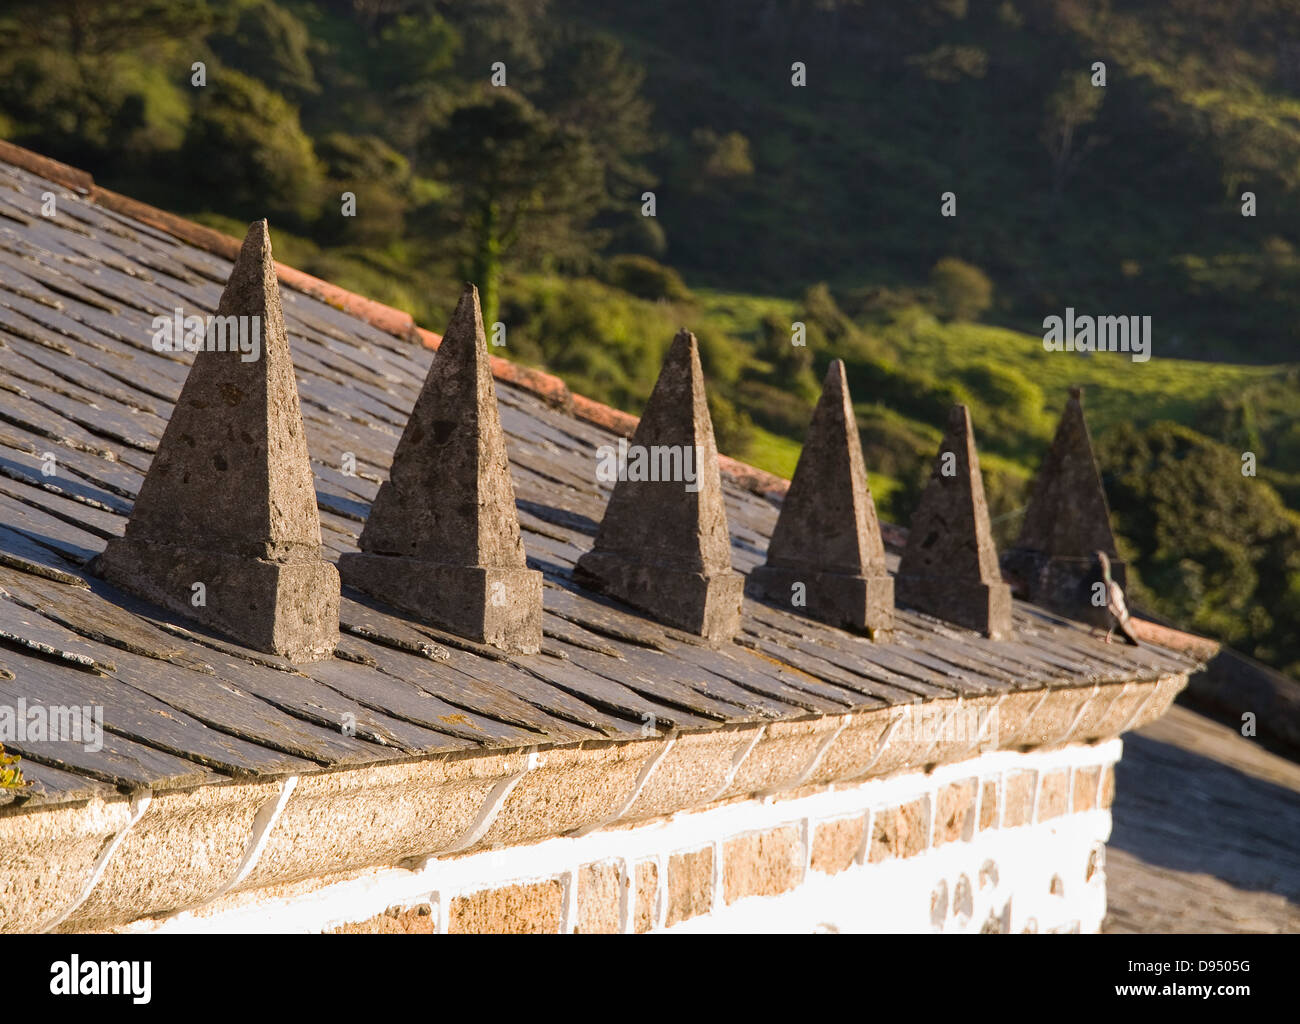 Slate roof detail with stone pinnacles. This place is located in San Andres de teixido, Galicia, Spain. Stock Photo